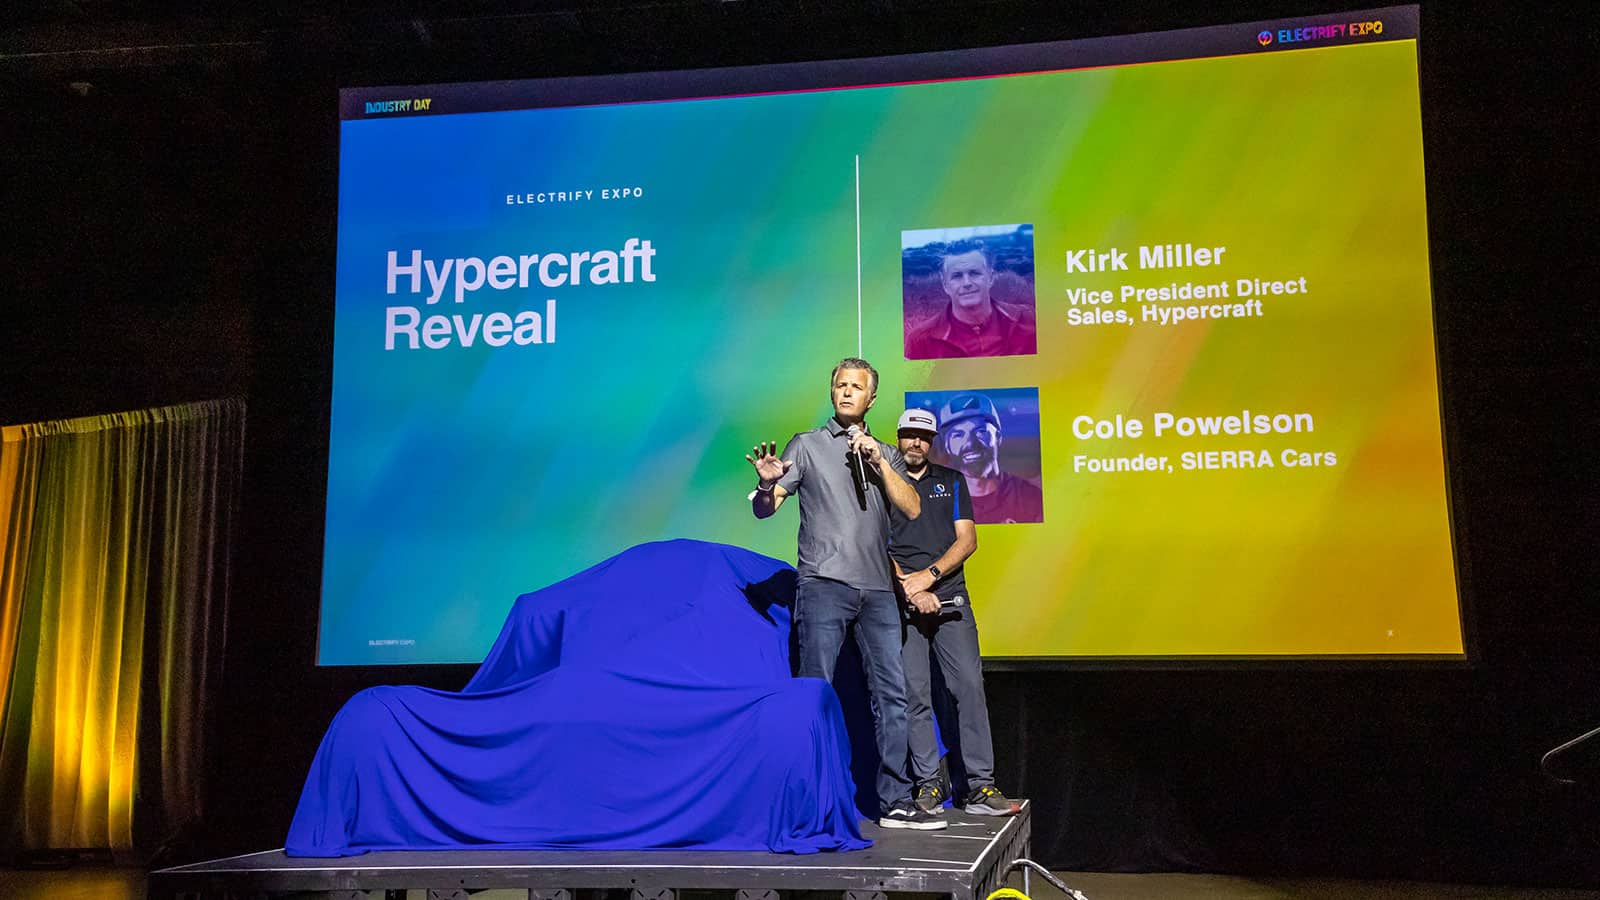 Electrify Expo Industry Day with Hypercraft's Kirk Miller and SIERRA car;s Cole Powelson reveal - get ready Austin